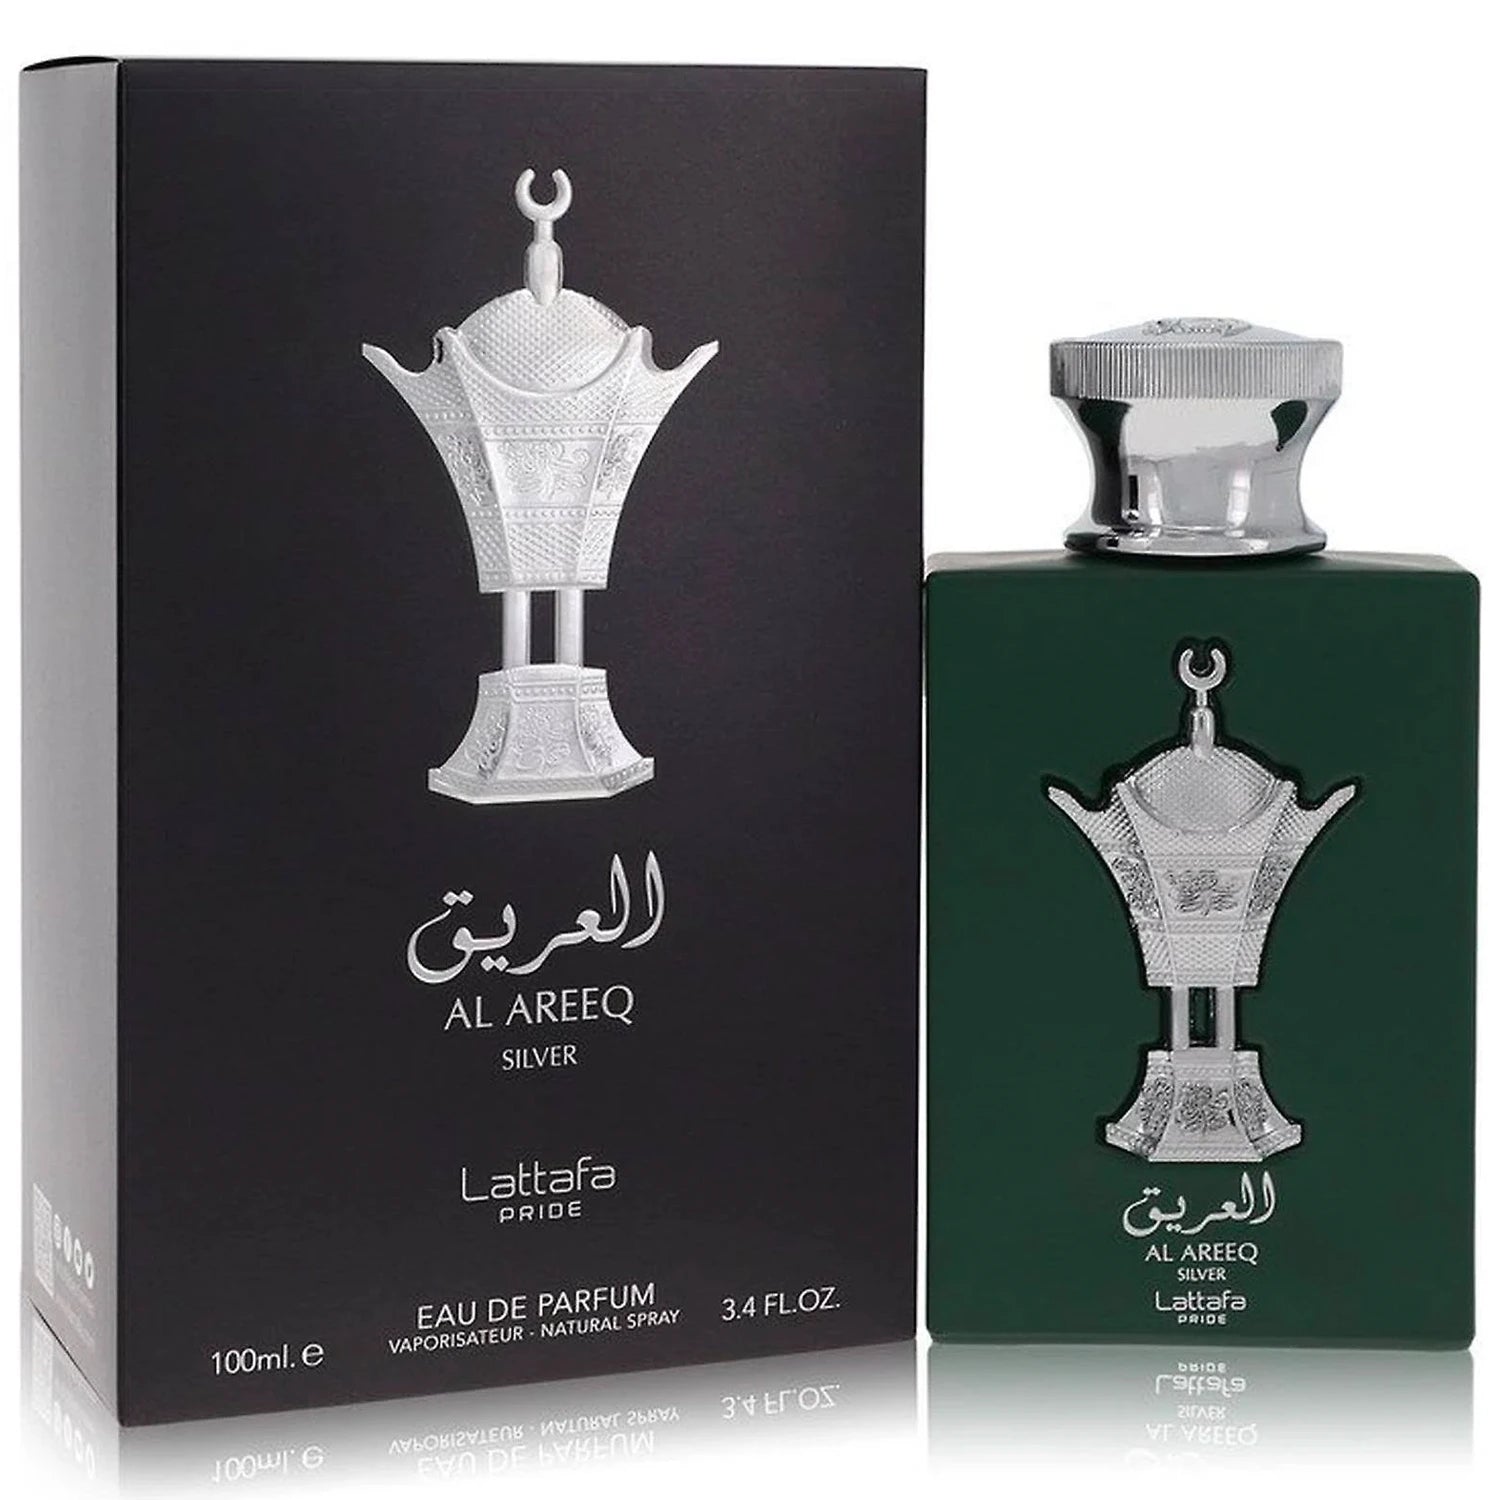 <p data-mce-fragment="1"><em>﻿INSPIRED BY </em><strong>CHOPARD BLACK INCENSE MALIKI</strong><strong></strong></p>
<p data-mce-fragment="1">Experience luxury and sophistication with Al Areeq Silver by Lattafa Perfumes. This unisex fragrance, launched in 2022, blends notes of cardamom, lavender, tobacco and more for a rich and enticing scent. Perfect for any occasion, indulge in the elegant and timeless aroma of Al Areeq Silver.</p>